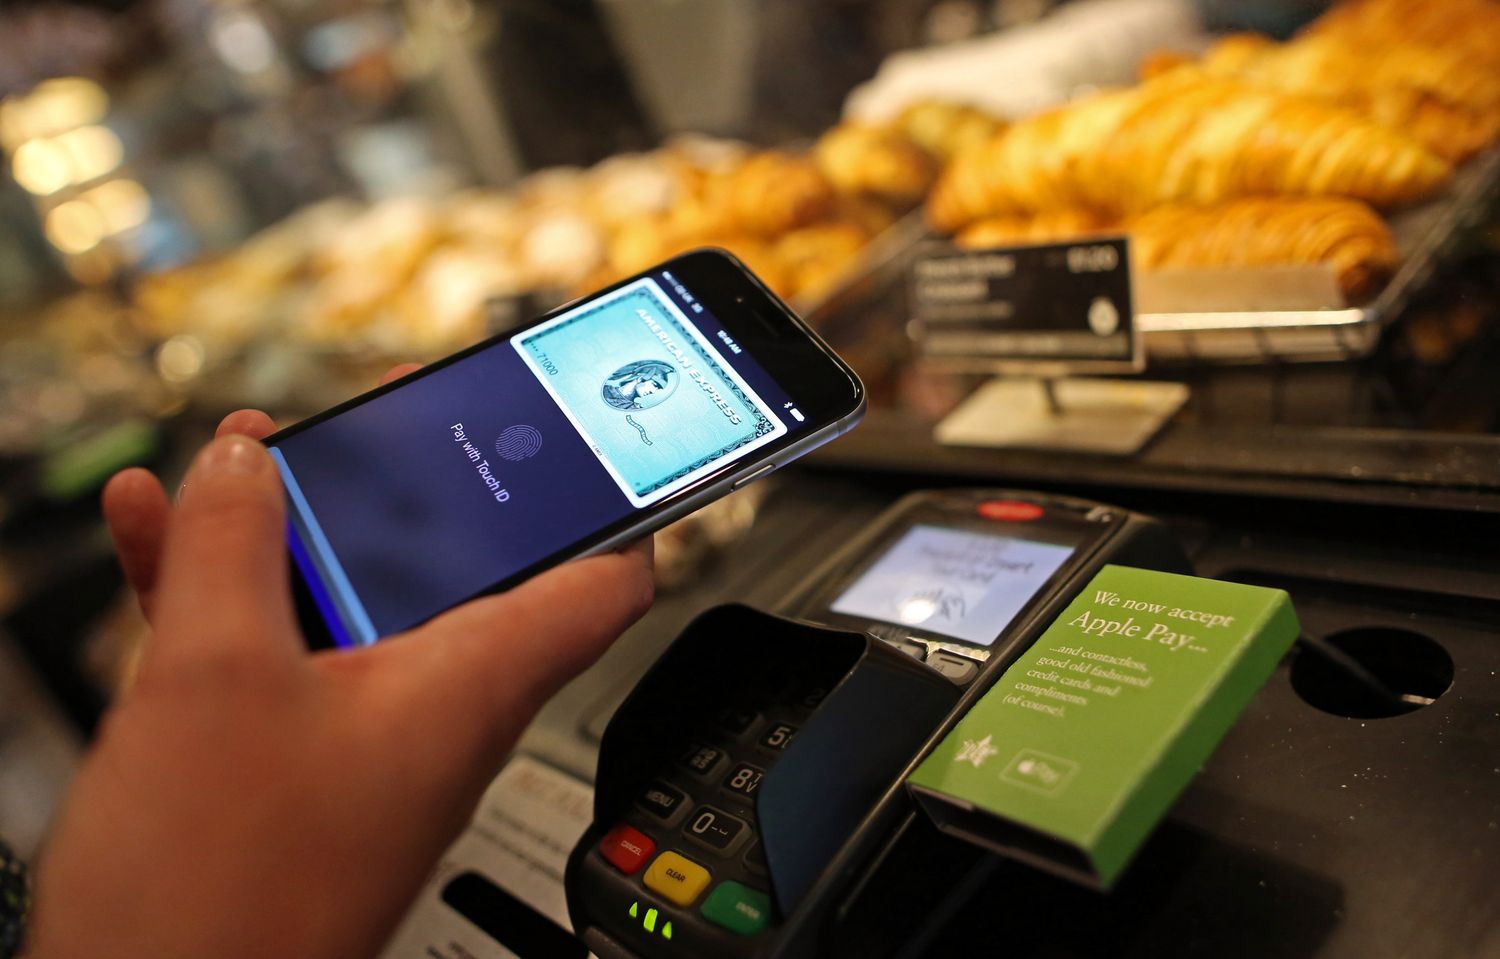 apple-pay-and-android-pay-coming-to-atms-soon-report-says